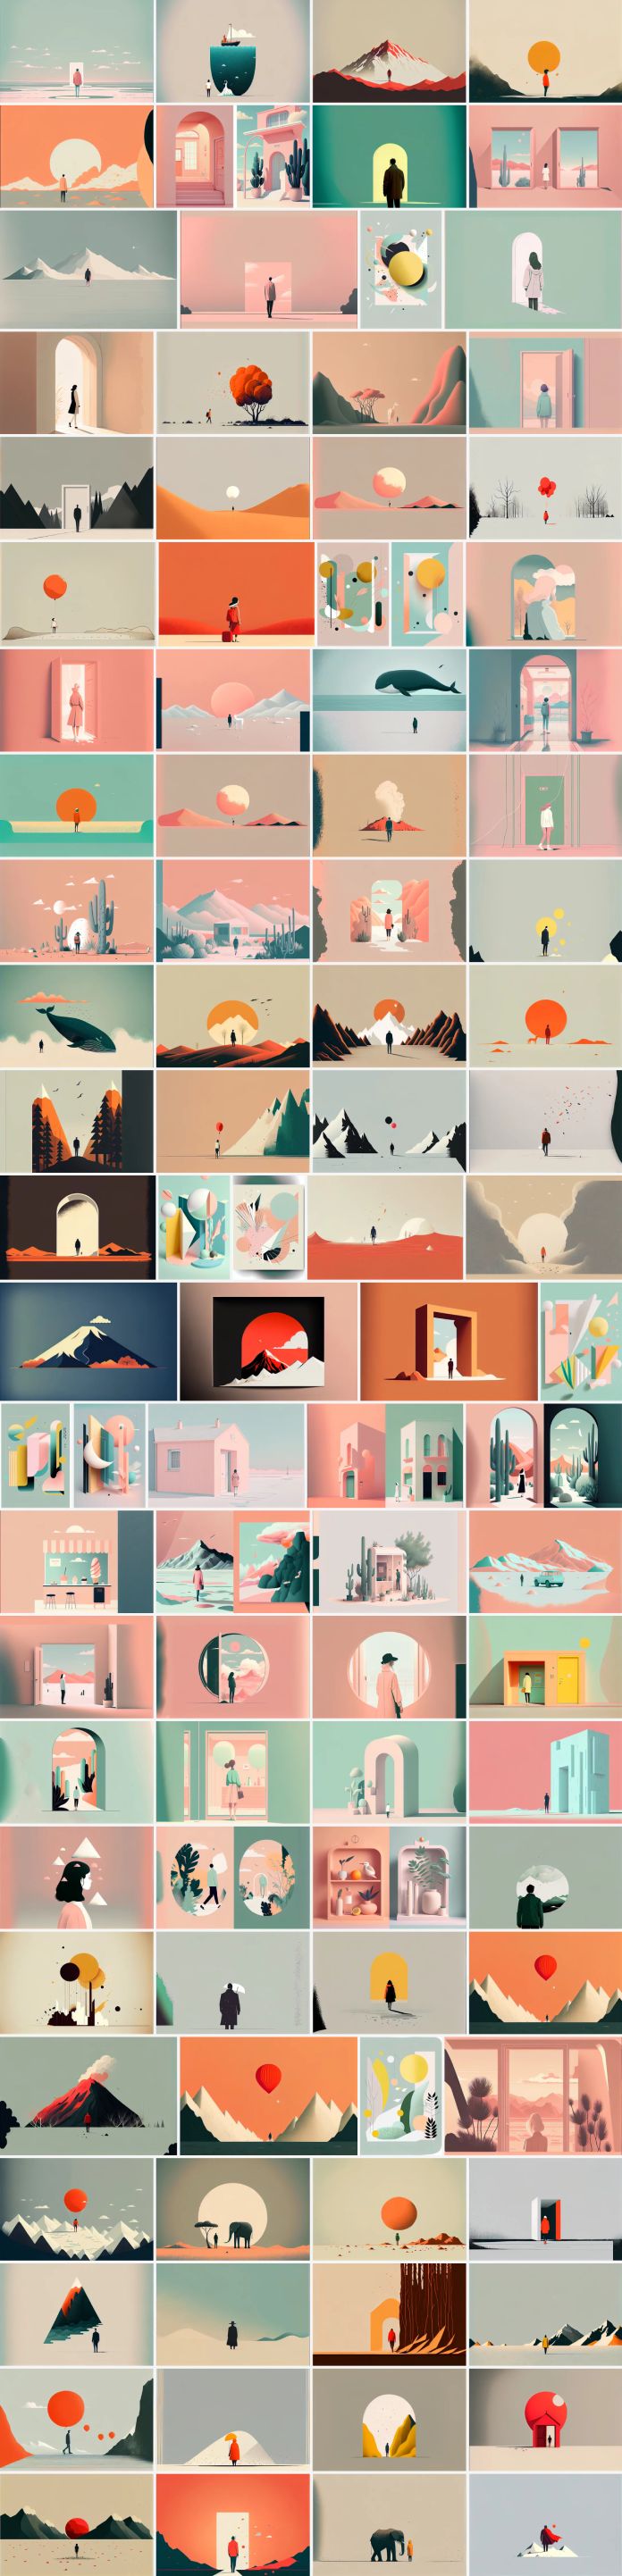 These minimalist illustrations of surreal scenes and abstract shapes are available for download on Adobe Stock.